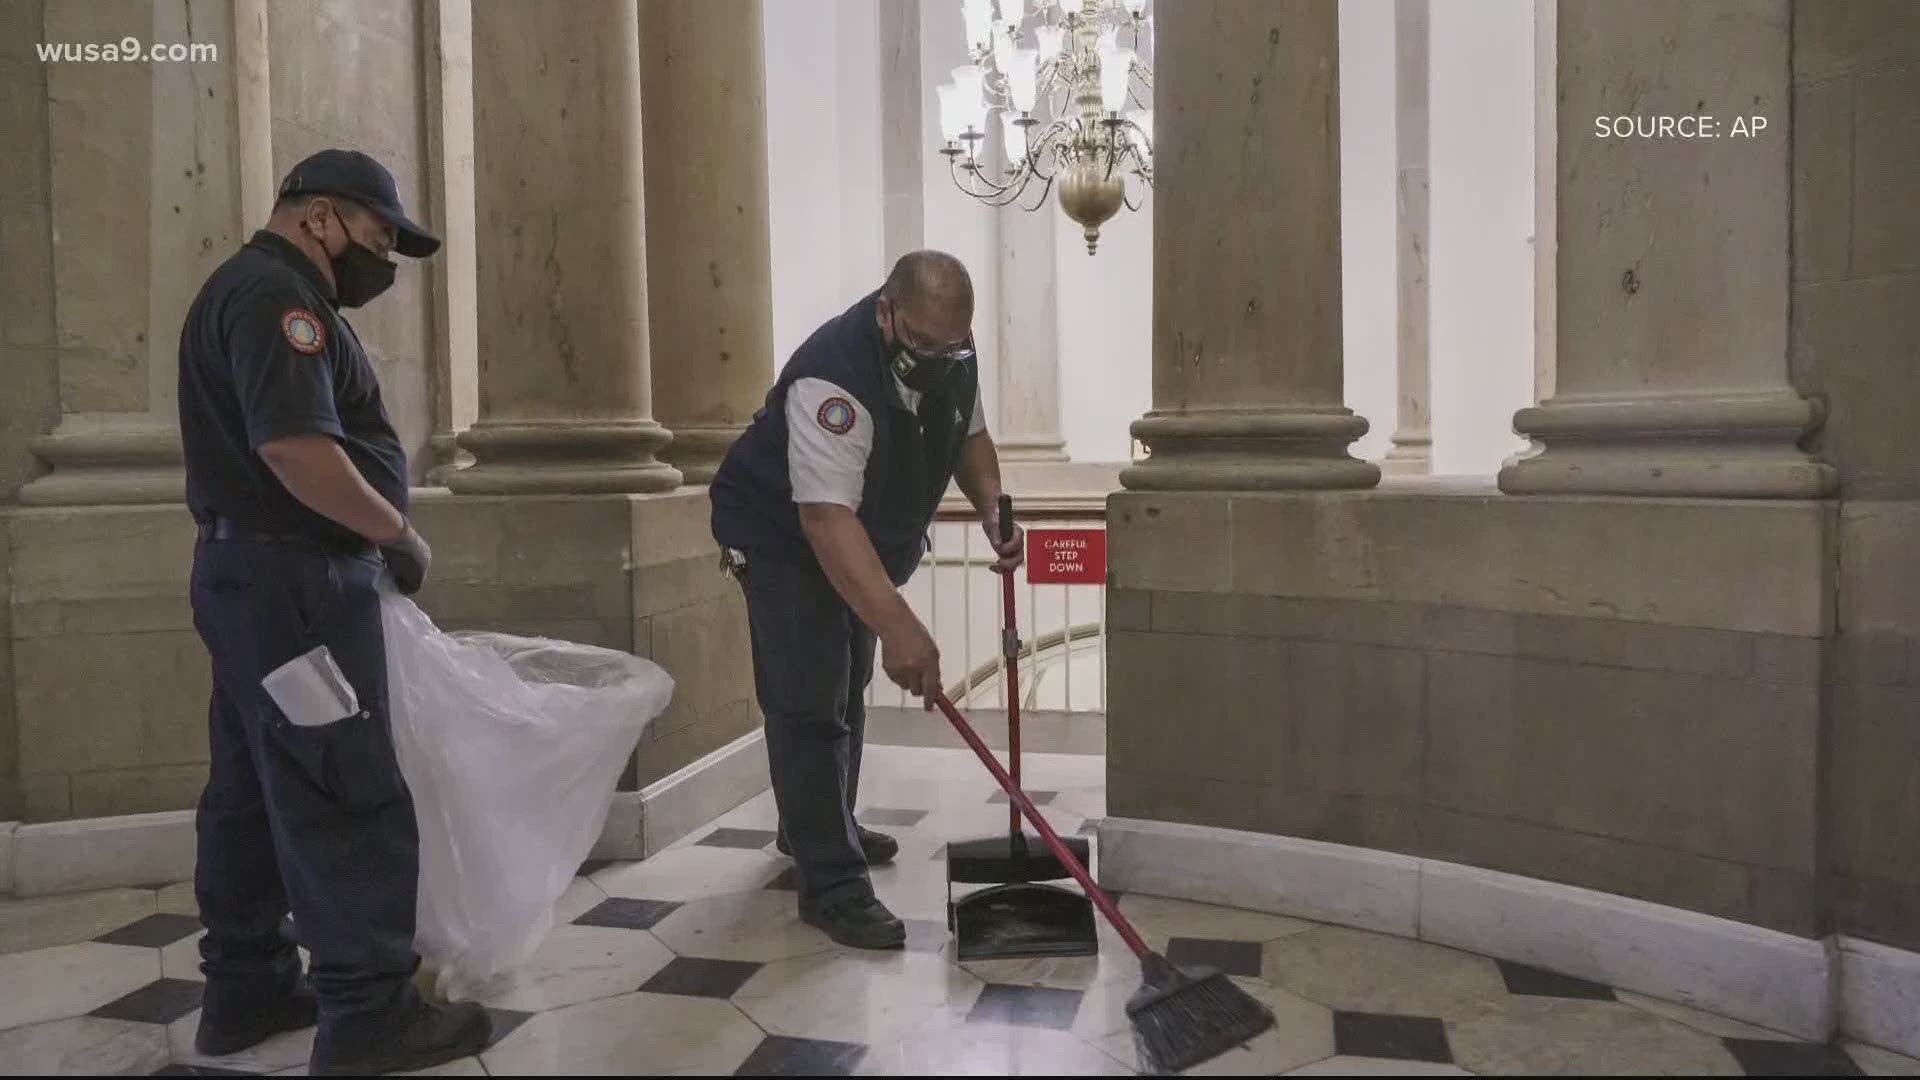 A day after domestic terrorists rushed onto the grounds of the US Capitol, crews fixed broken windows and cleaned floors littered with debris on Thursday.